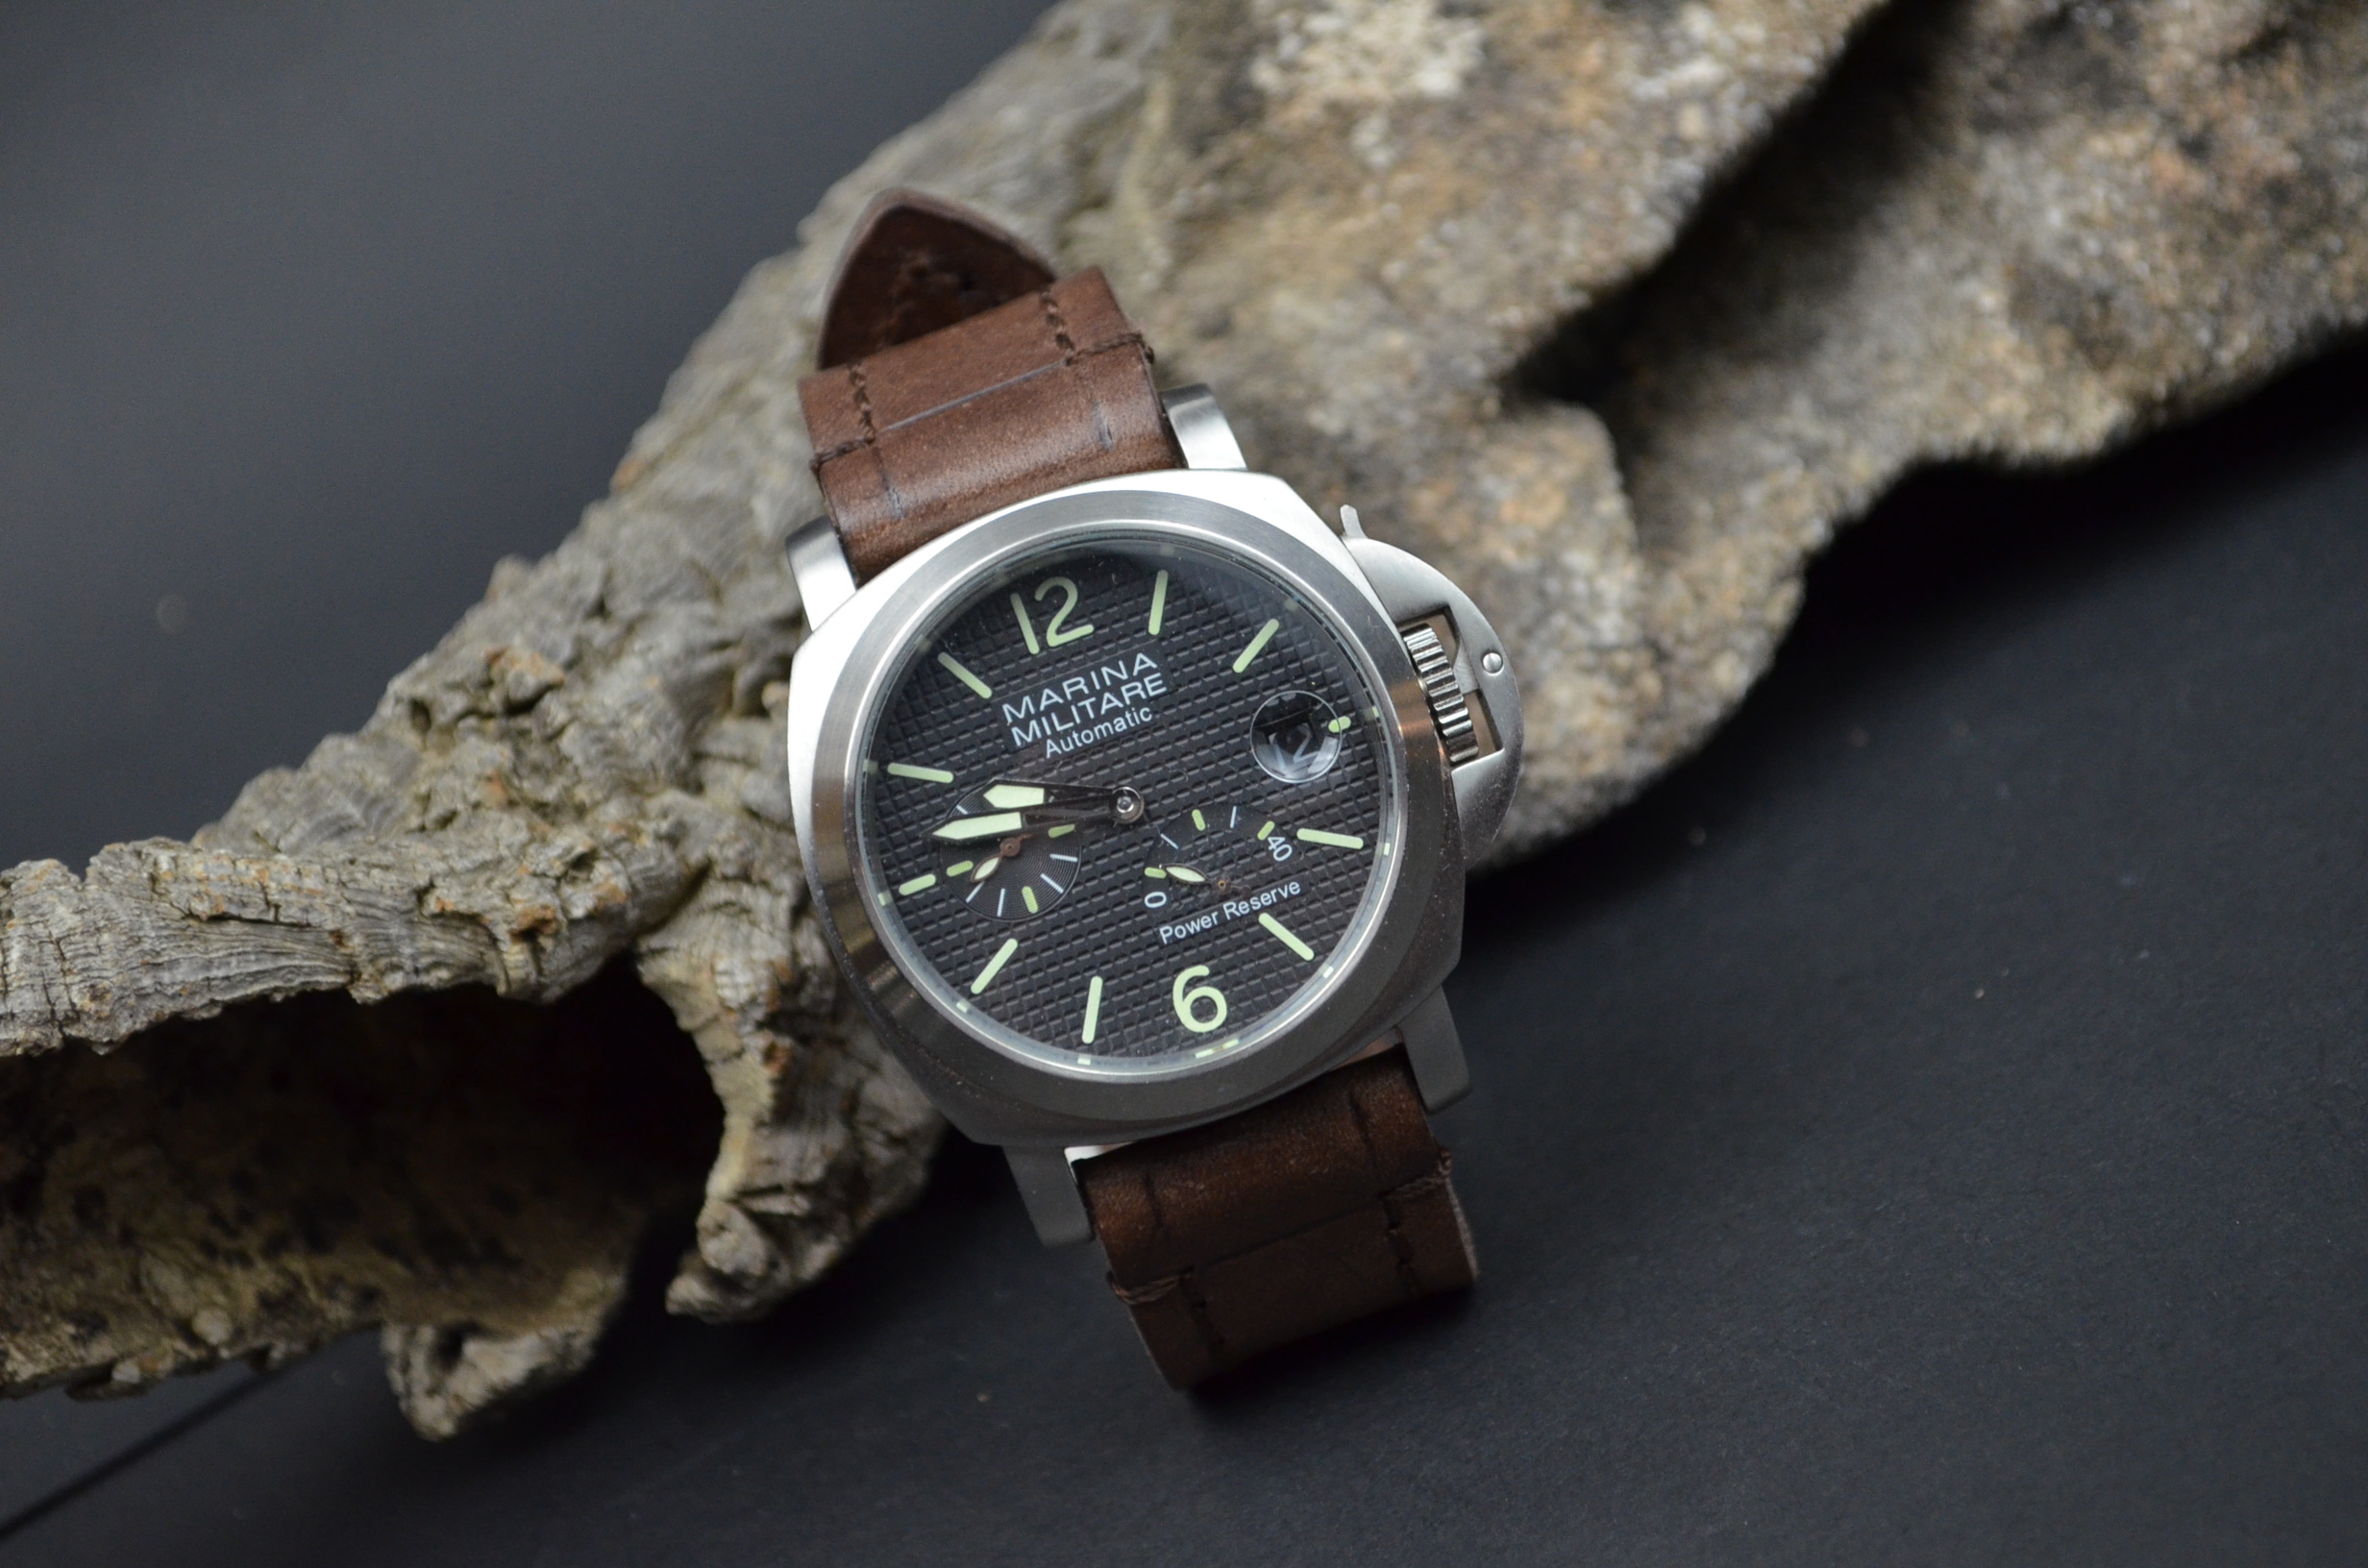 BROWN I is one of our hand crafted watch straps. Available in brown color, 4 - 4.5 mm thick.